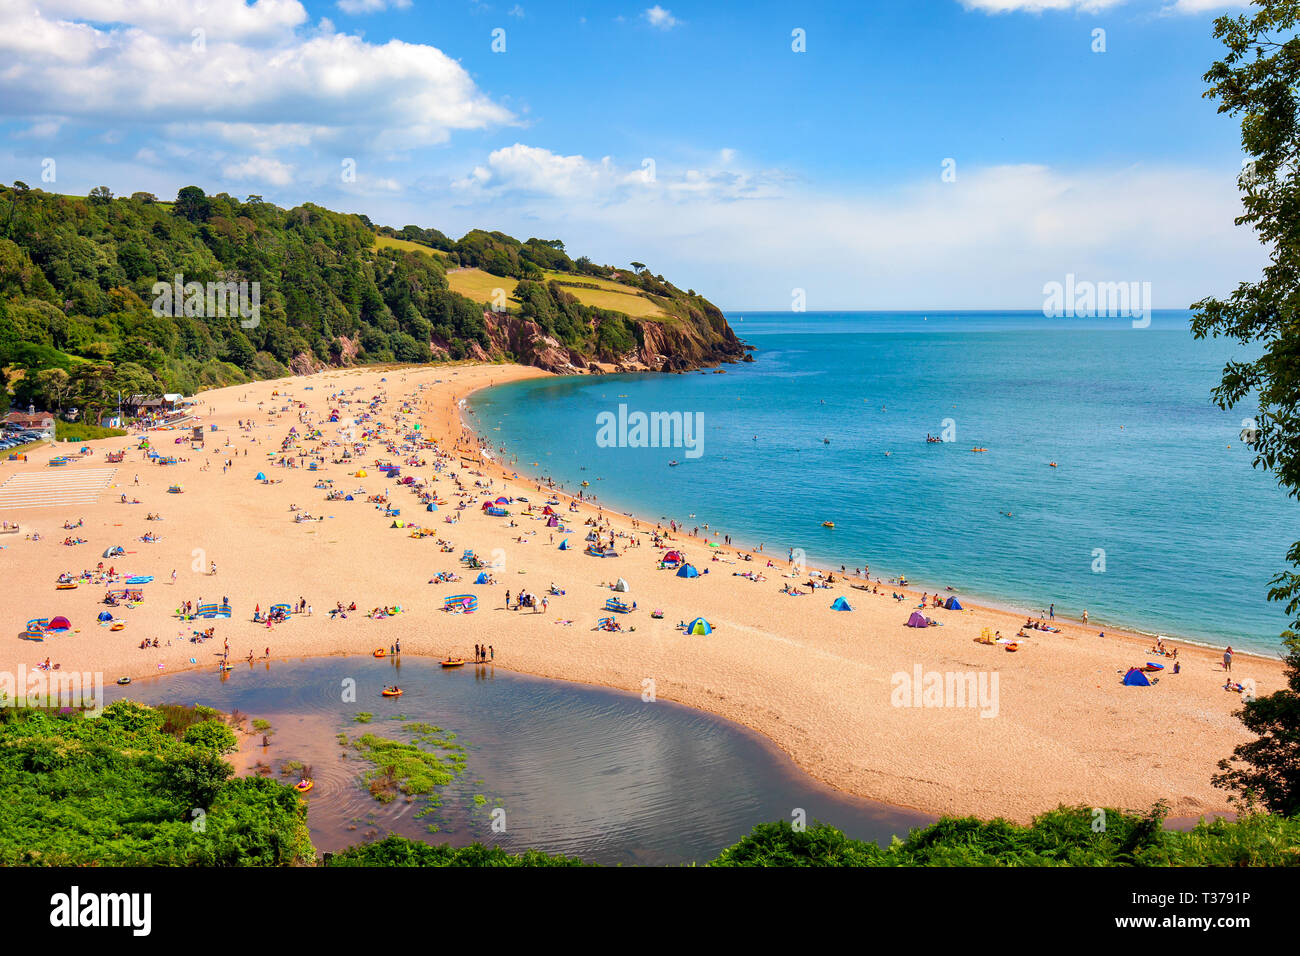 Image of Blackpool sands beach near Dartmouth in Devon in the height of summer Stock Photo